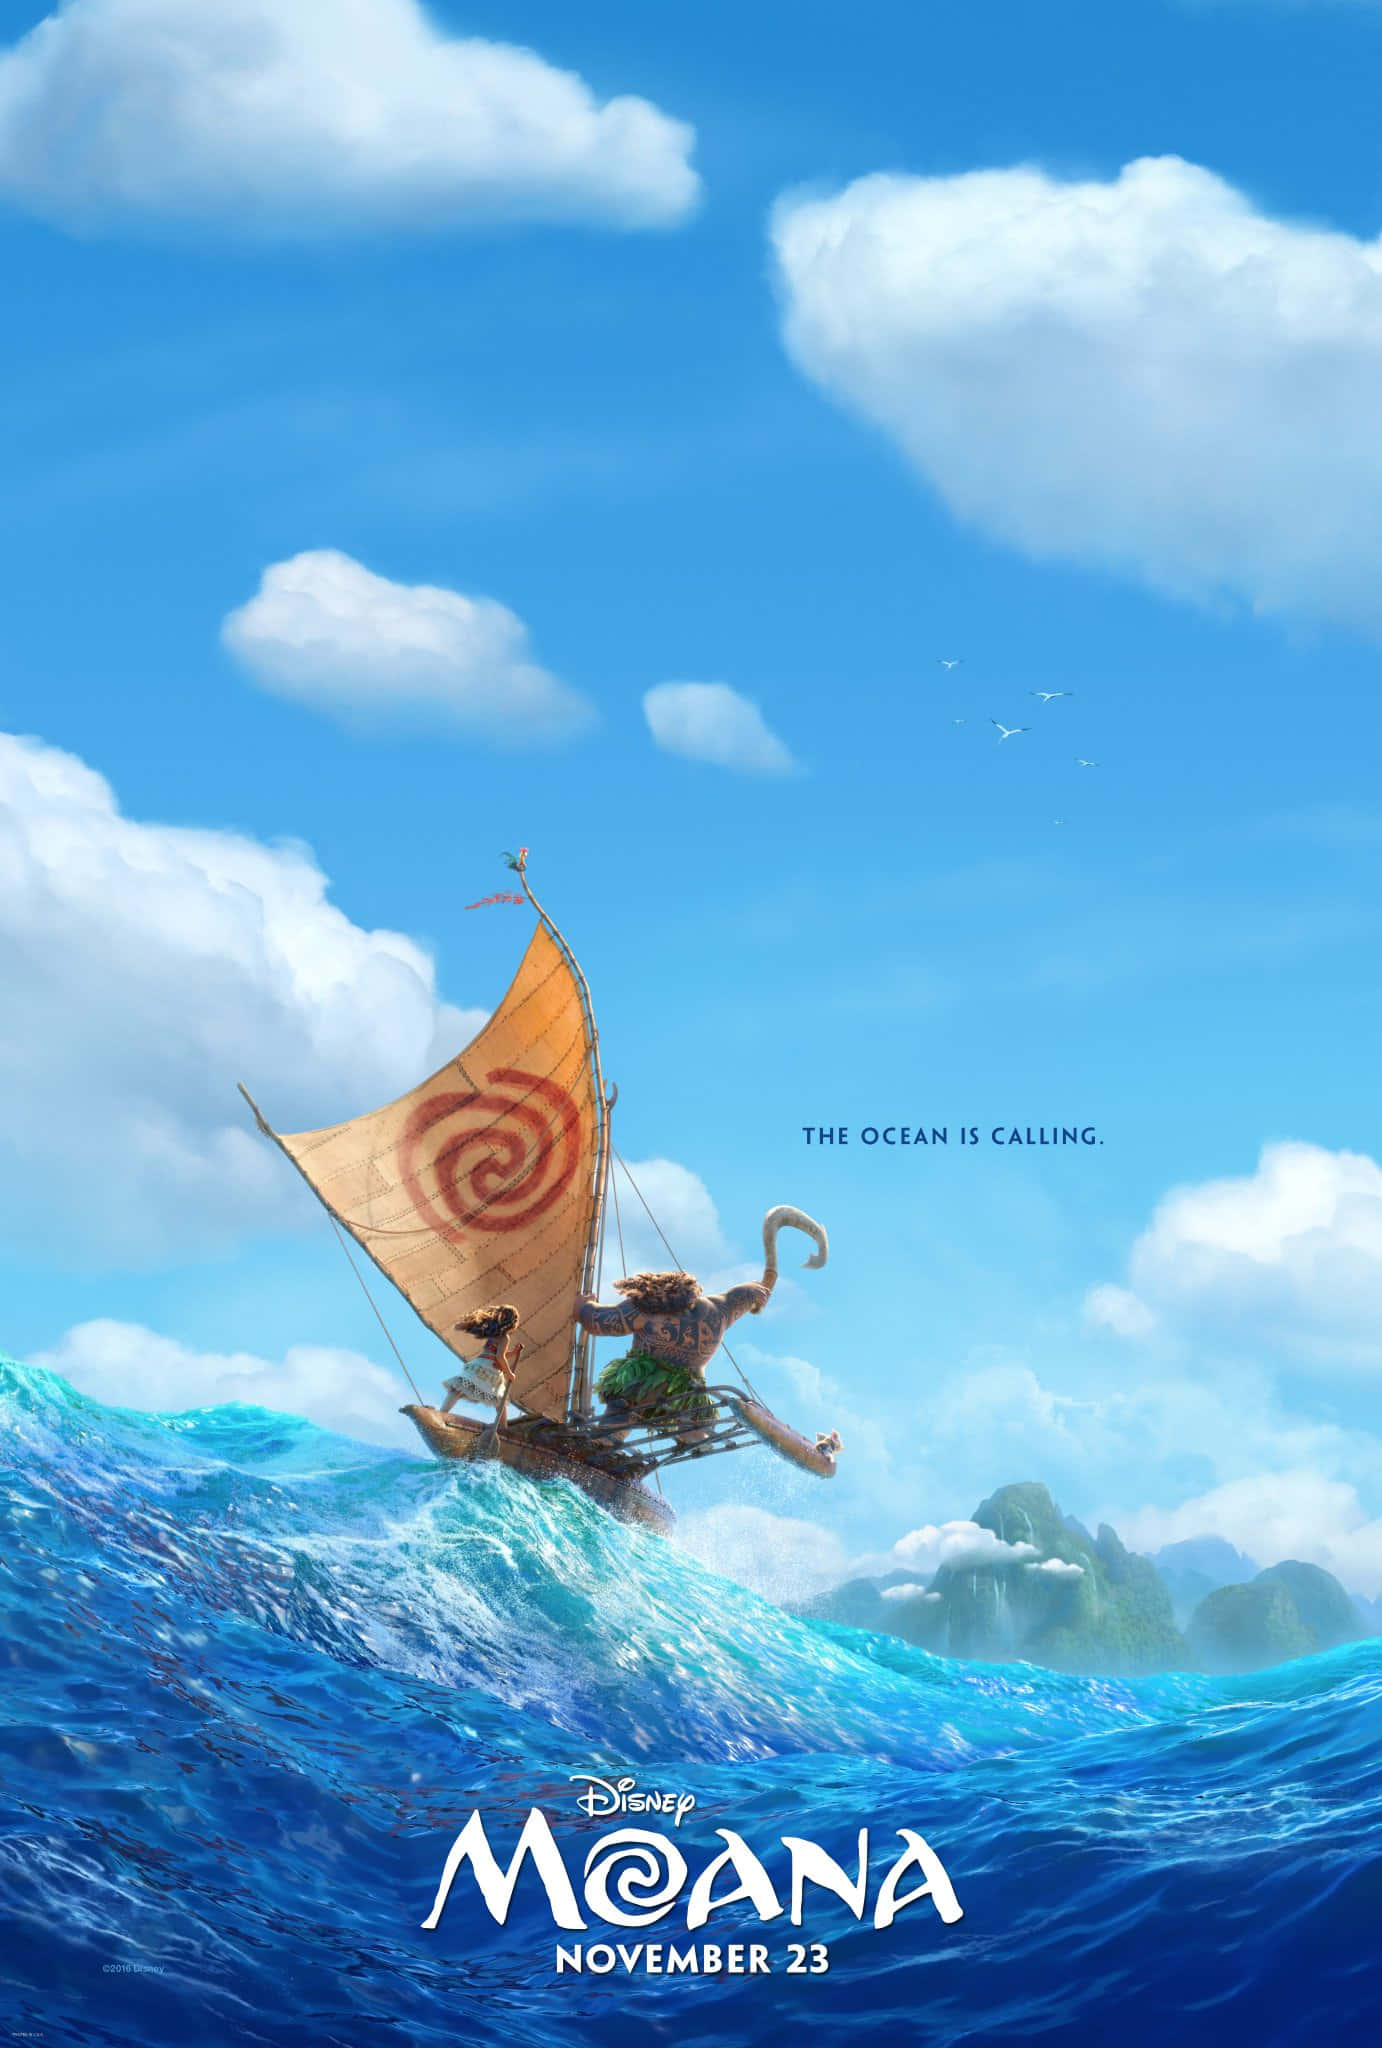 The beautiful Moana on her quest to restore harmony to her home